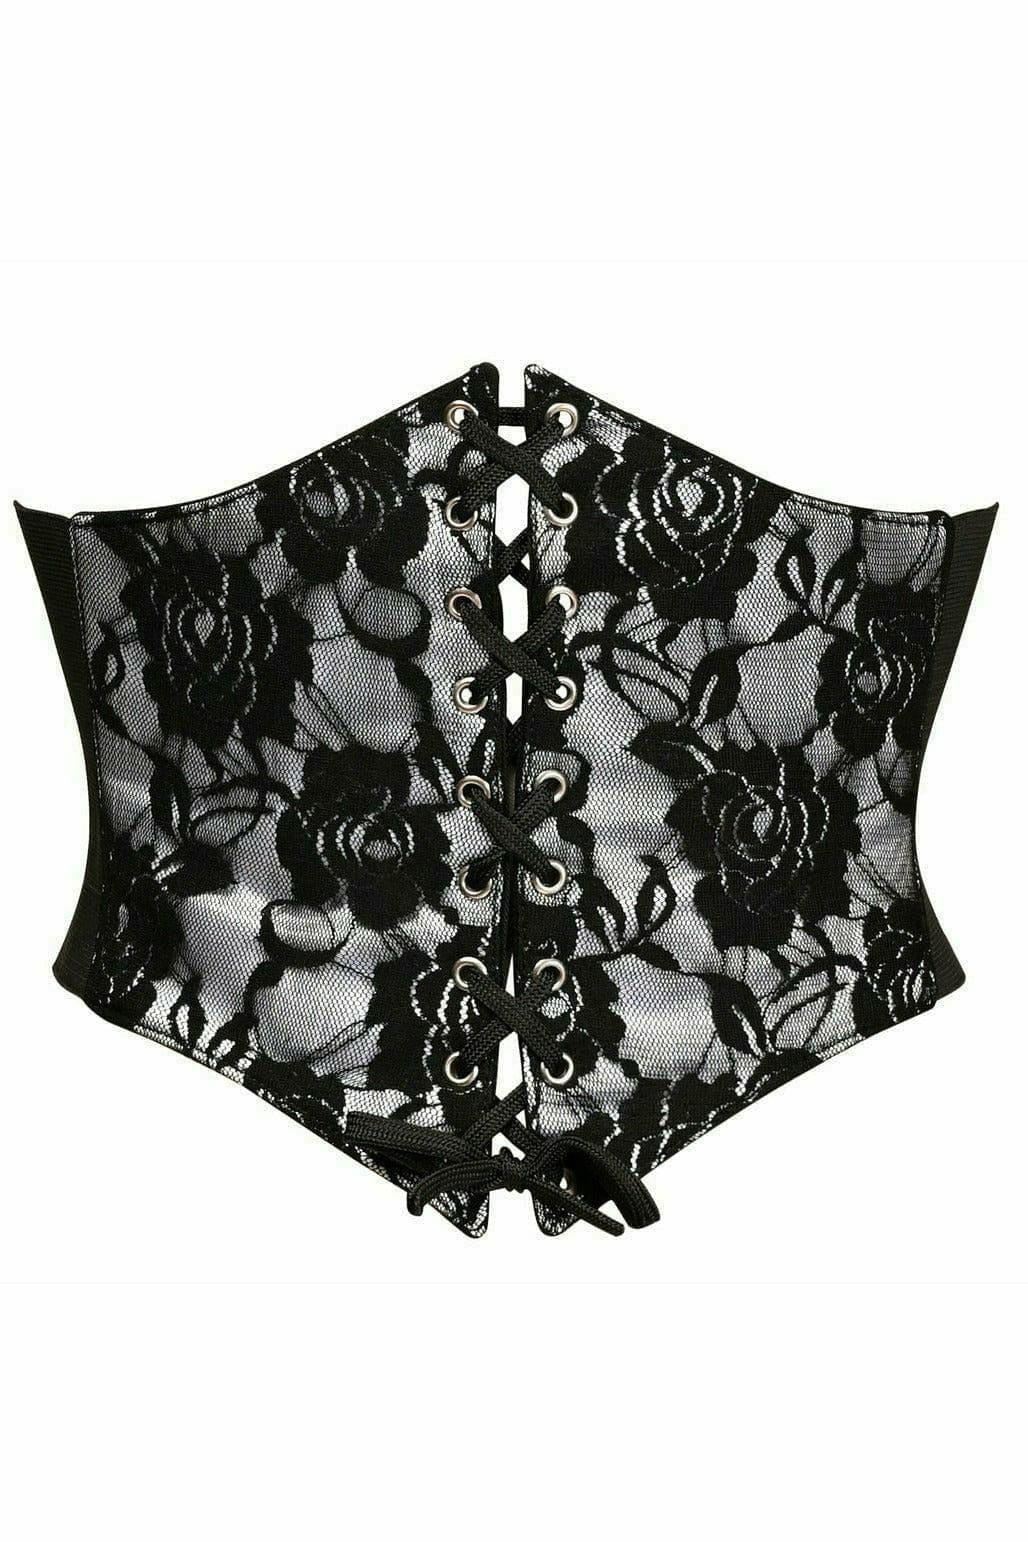 Sexy White with Black Lace Overlay Corset Belt Cincher Musotica.com